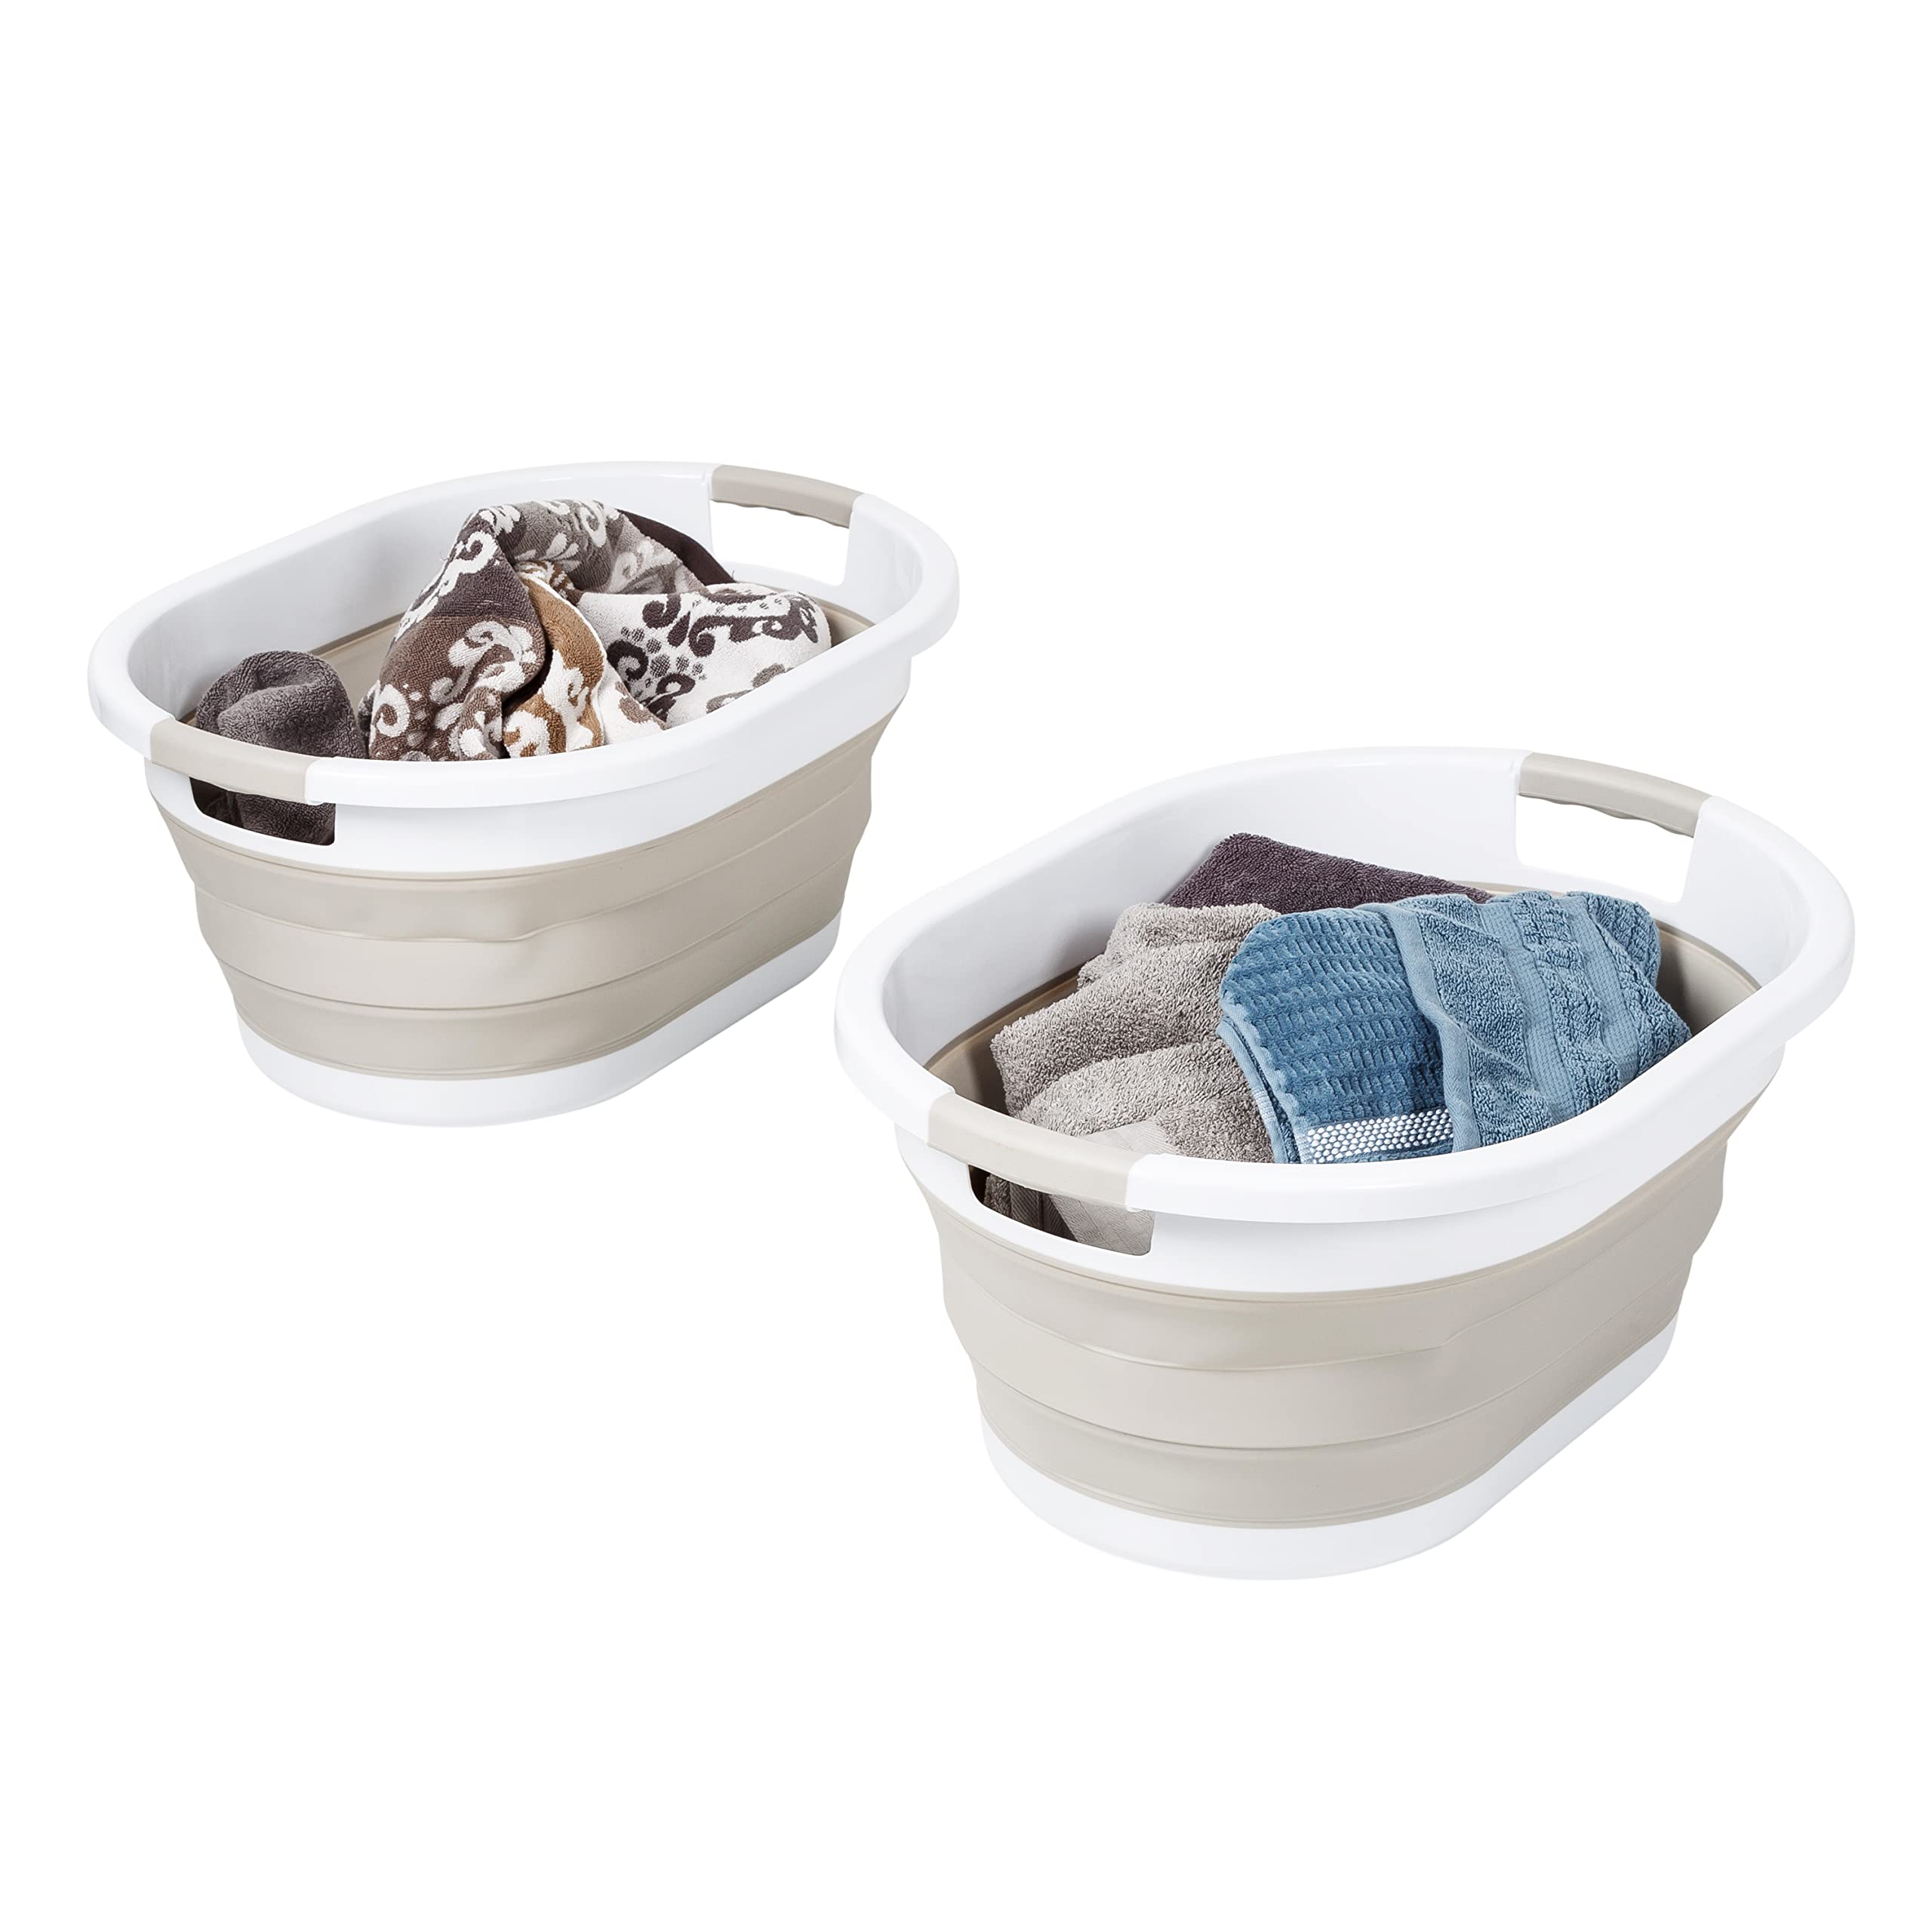 Honey-Can-Do Set of 2 Collapsible Rubber Laundry Baskets with Handles, Warm Grey & White HMP-09824 Grey